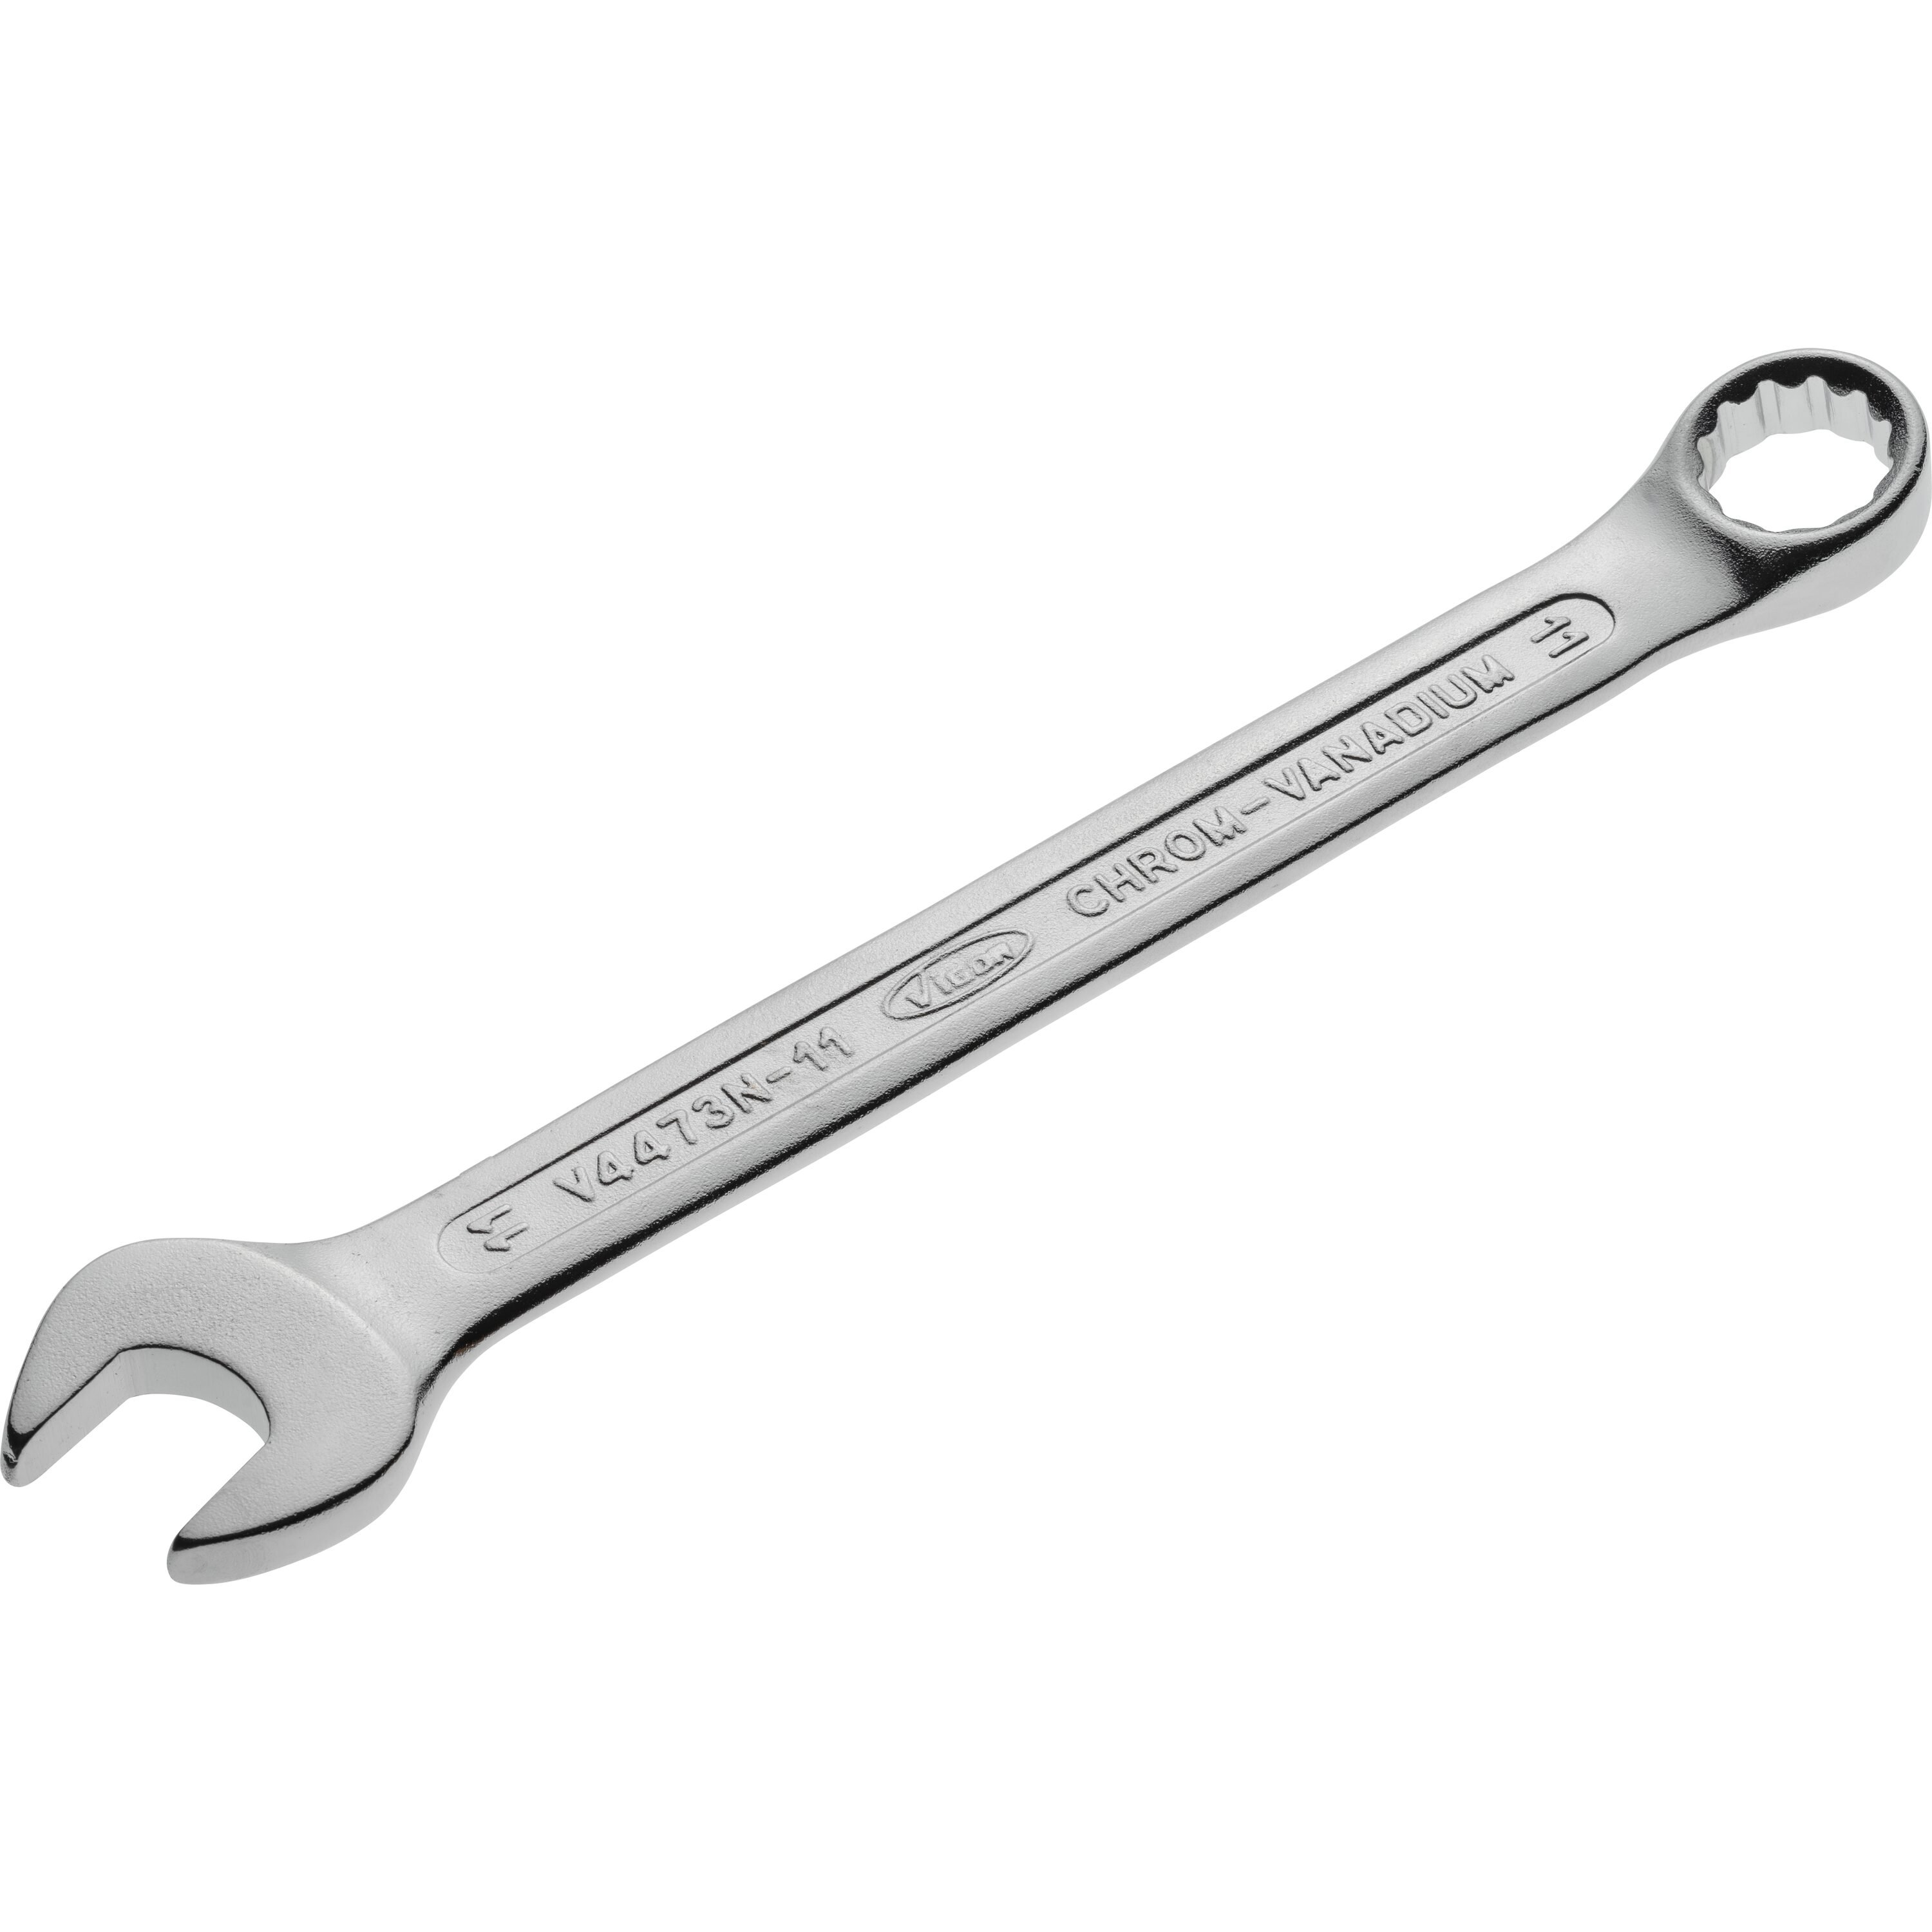 Open-end wrenches, spanners, socket wrenches, etc. Ring spanner, Size: 11 mm, Length: 145 mm  Art. V4473N11